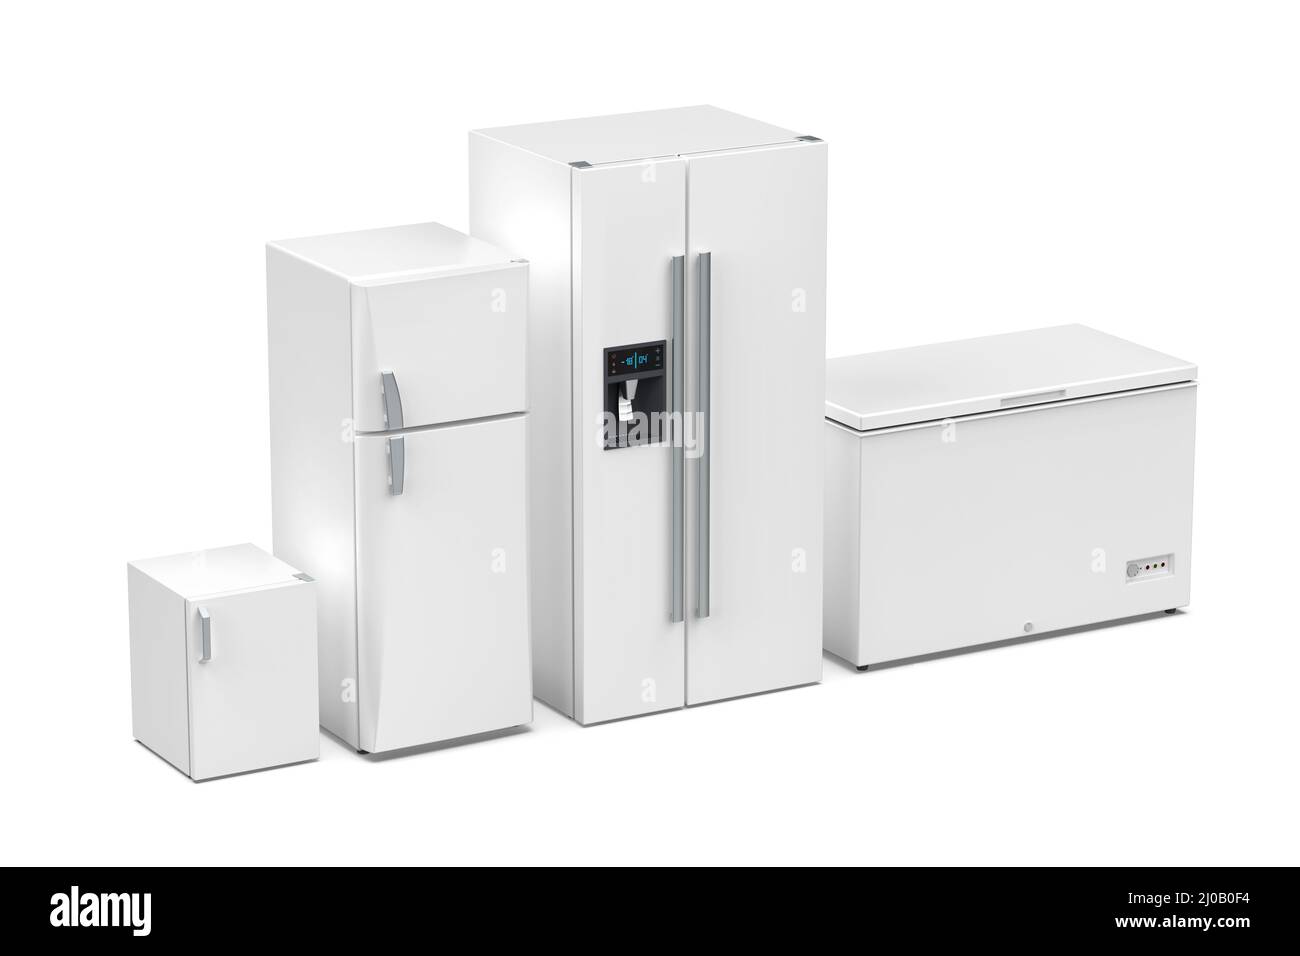 Group of four different refrigerators on white background Stock Photo